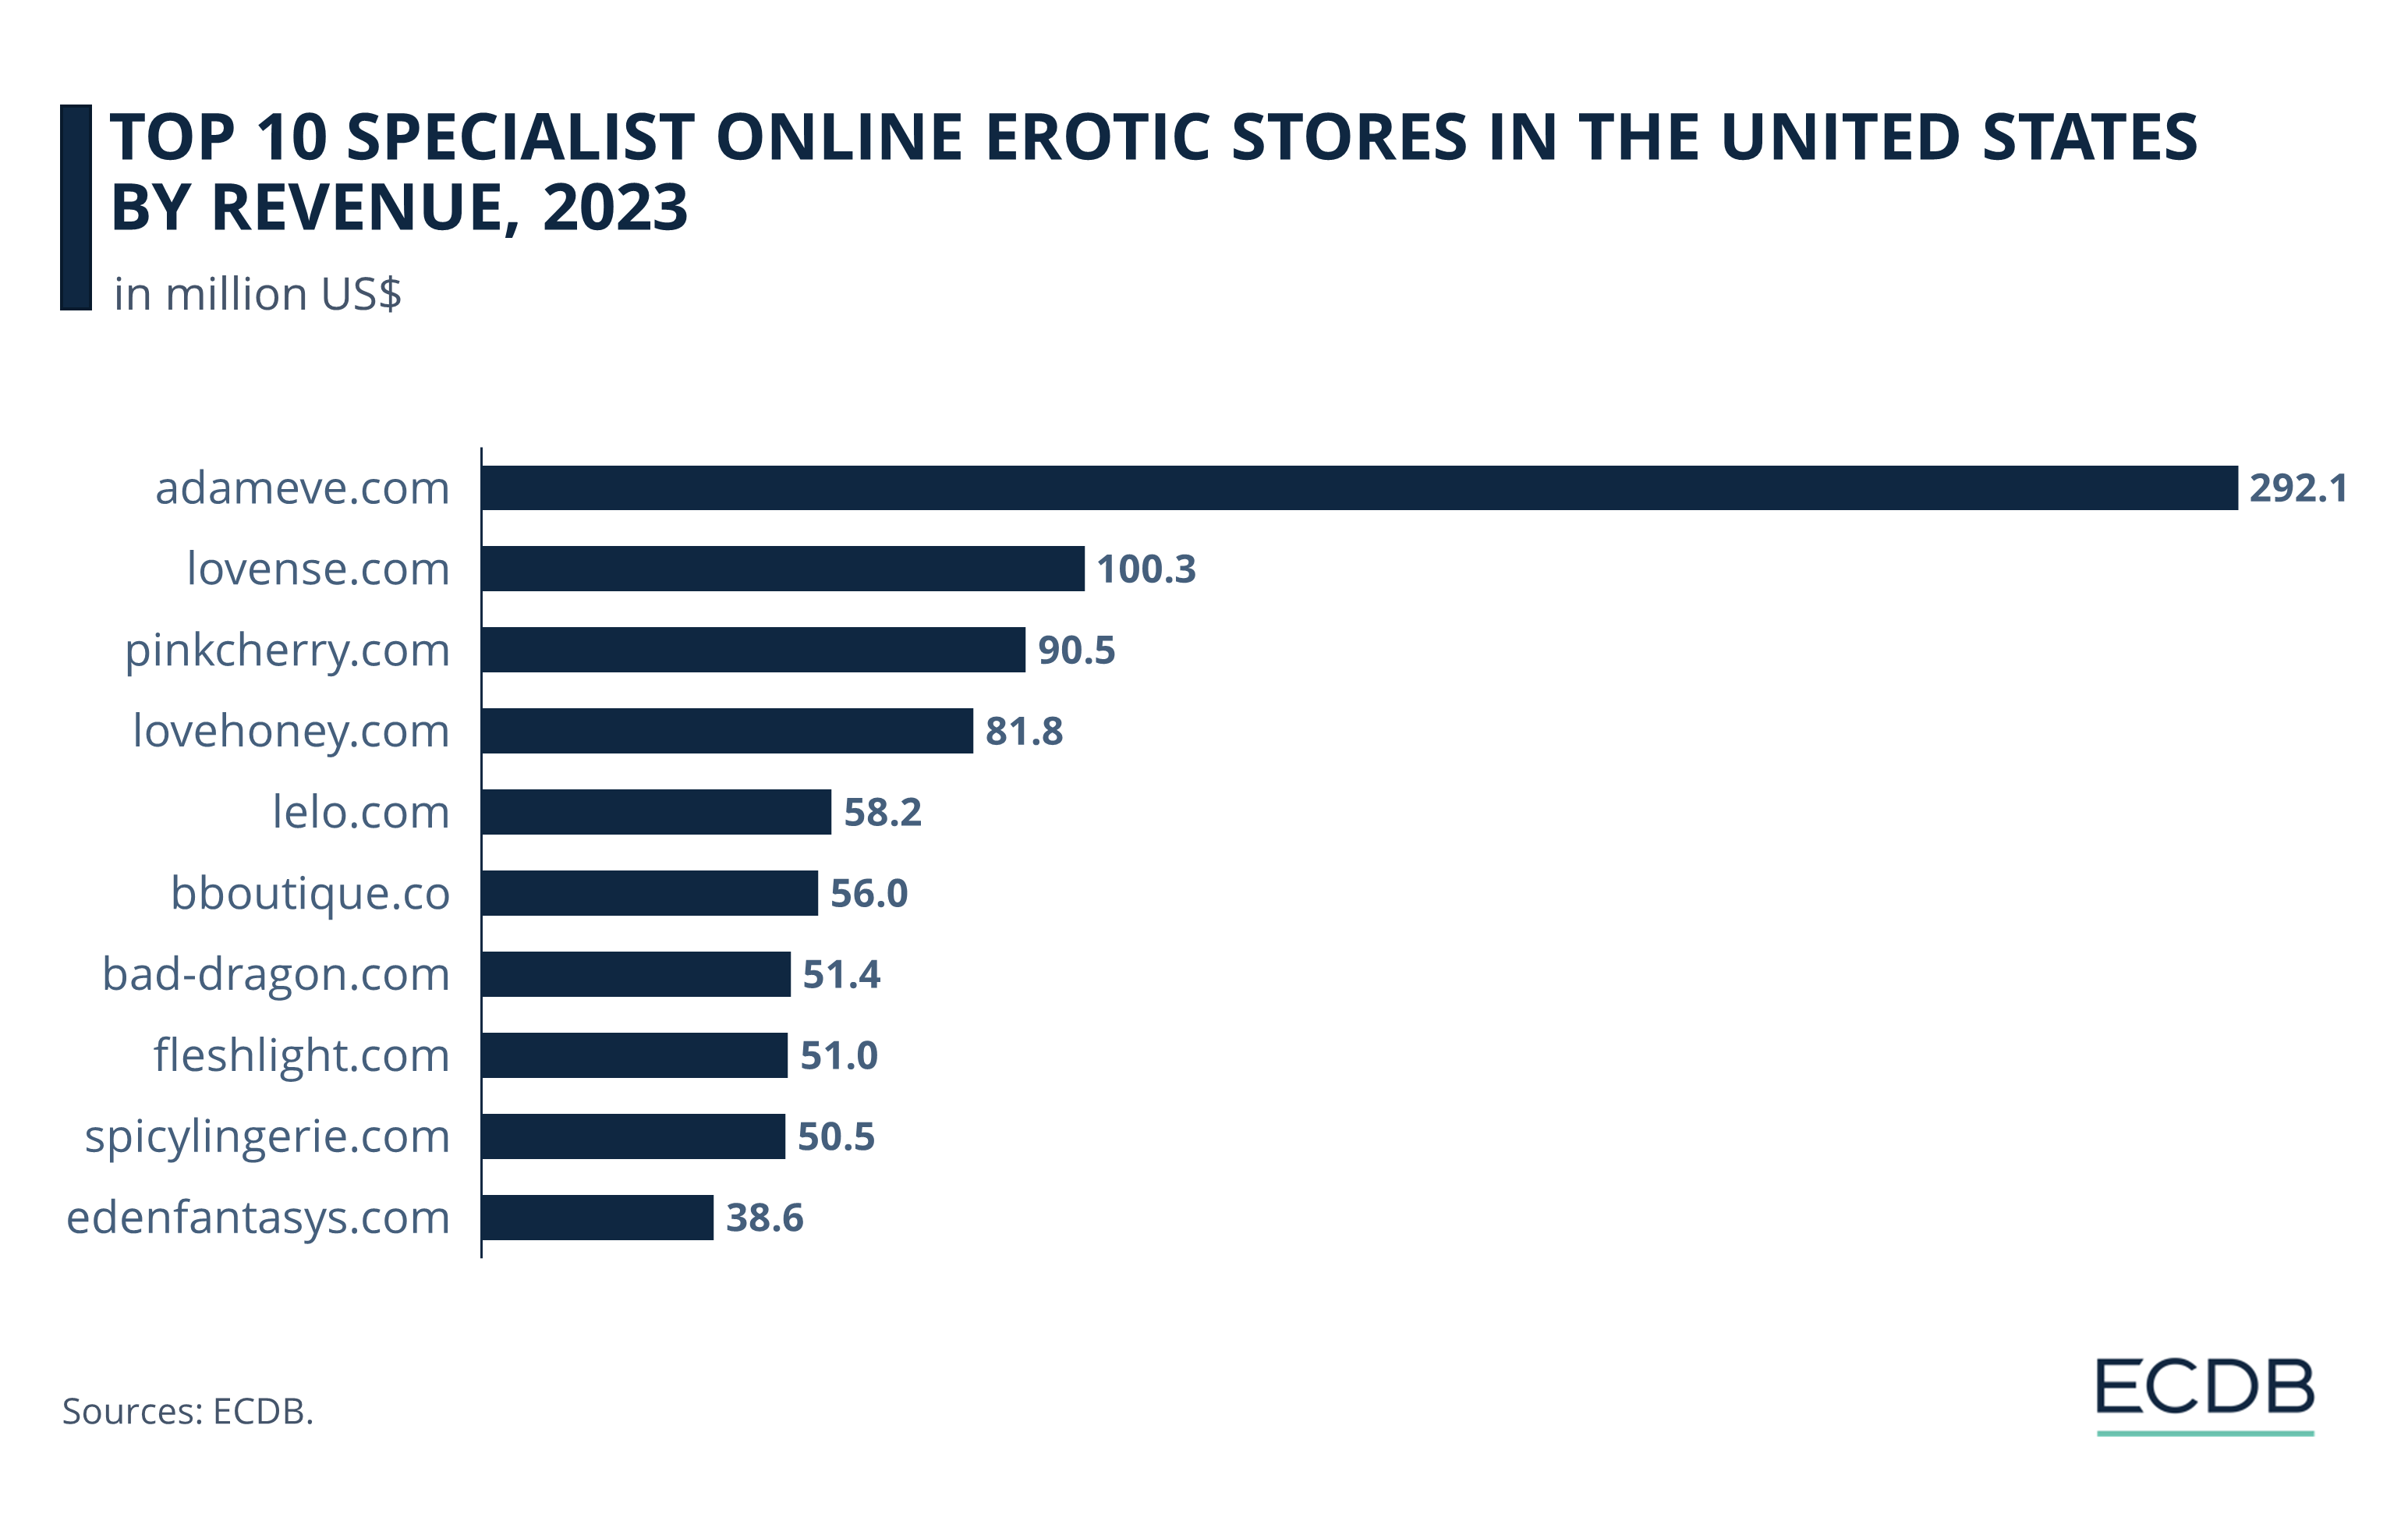 Top 10 Specialist Online Erotic Stores in the United States by Revenue, 2023